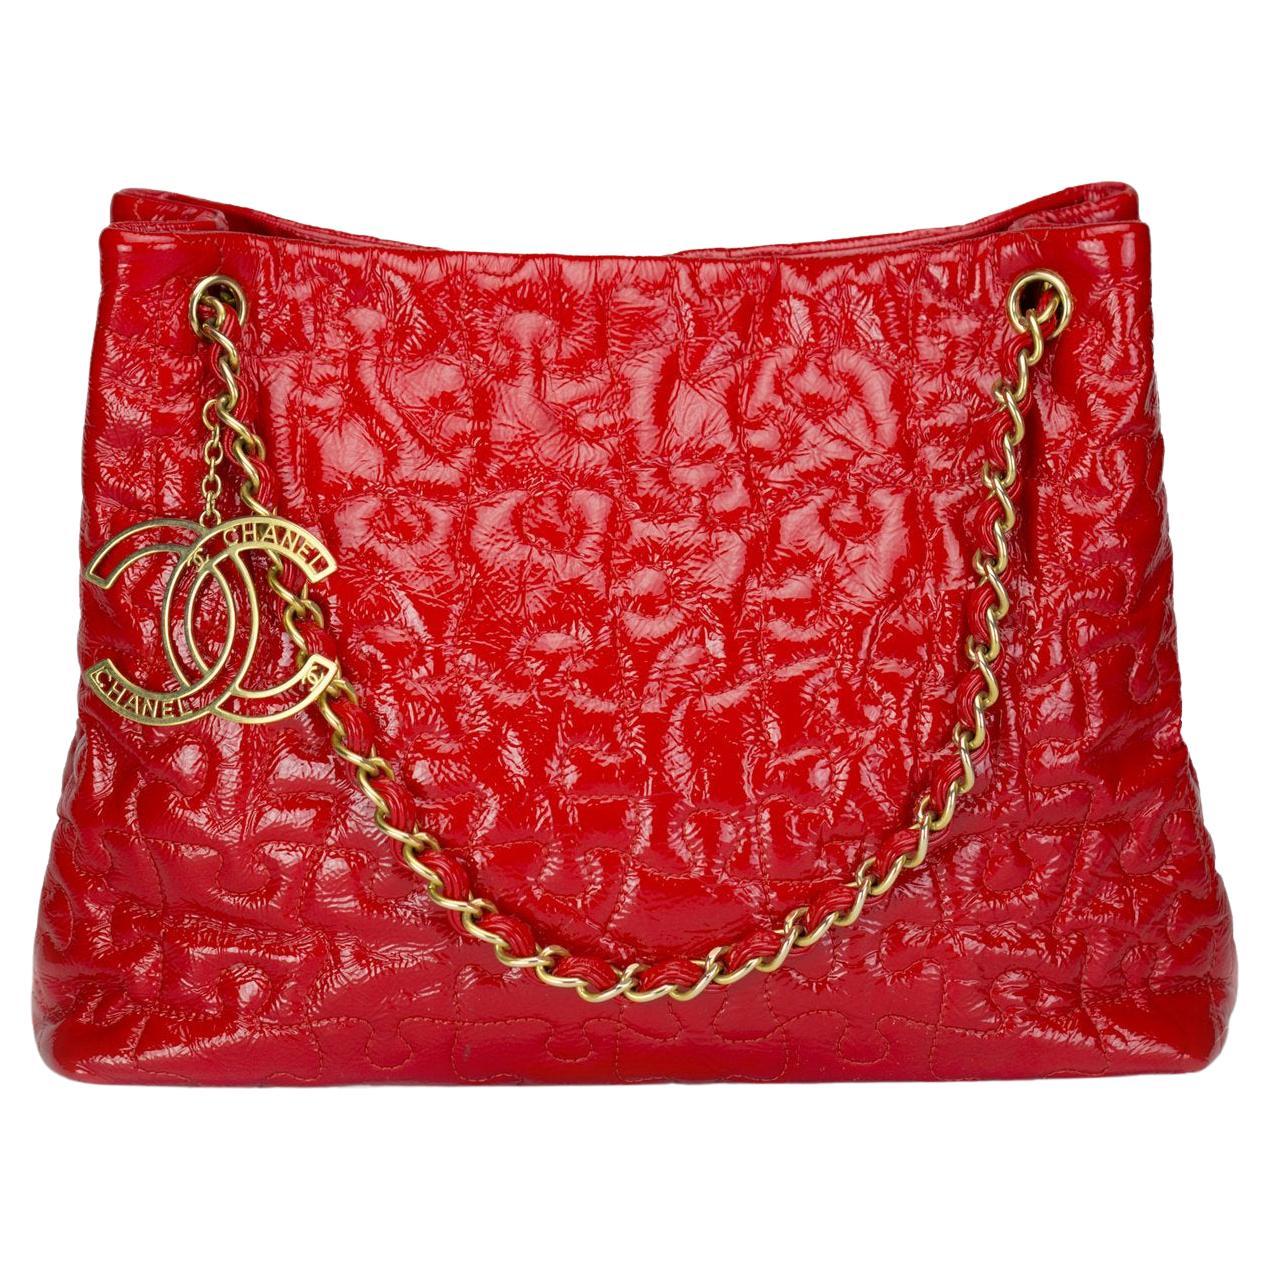 Chanel 2009 Rare Vintage Bright Red Quilted Puzzle Piece Patent Tote Satchel Bag For Sale